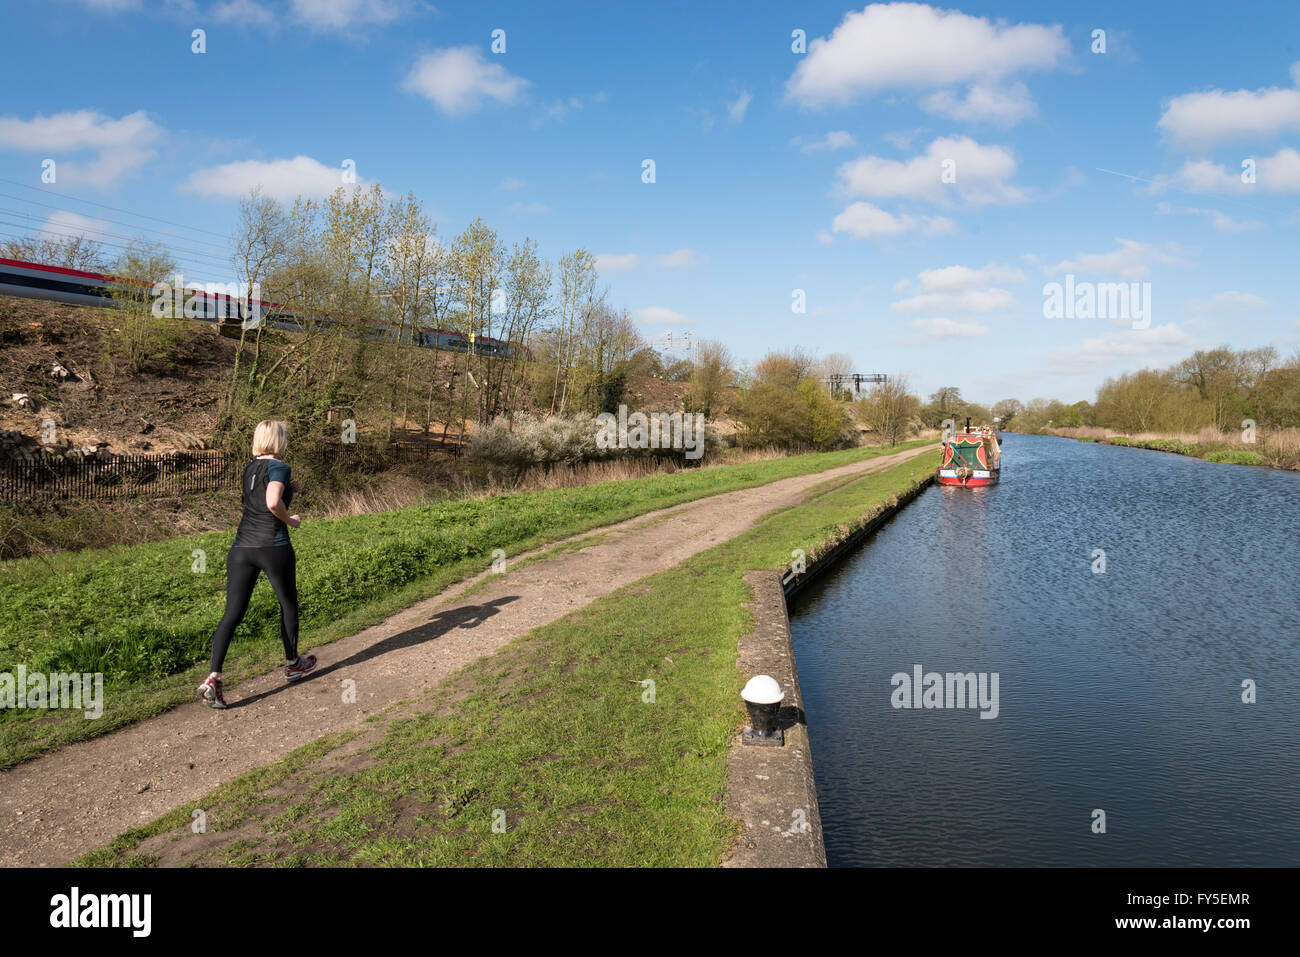 A northbound commuter train passing a woman jogging on the Grand Union Canal towpath in Hertfordshire. Stock Photo